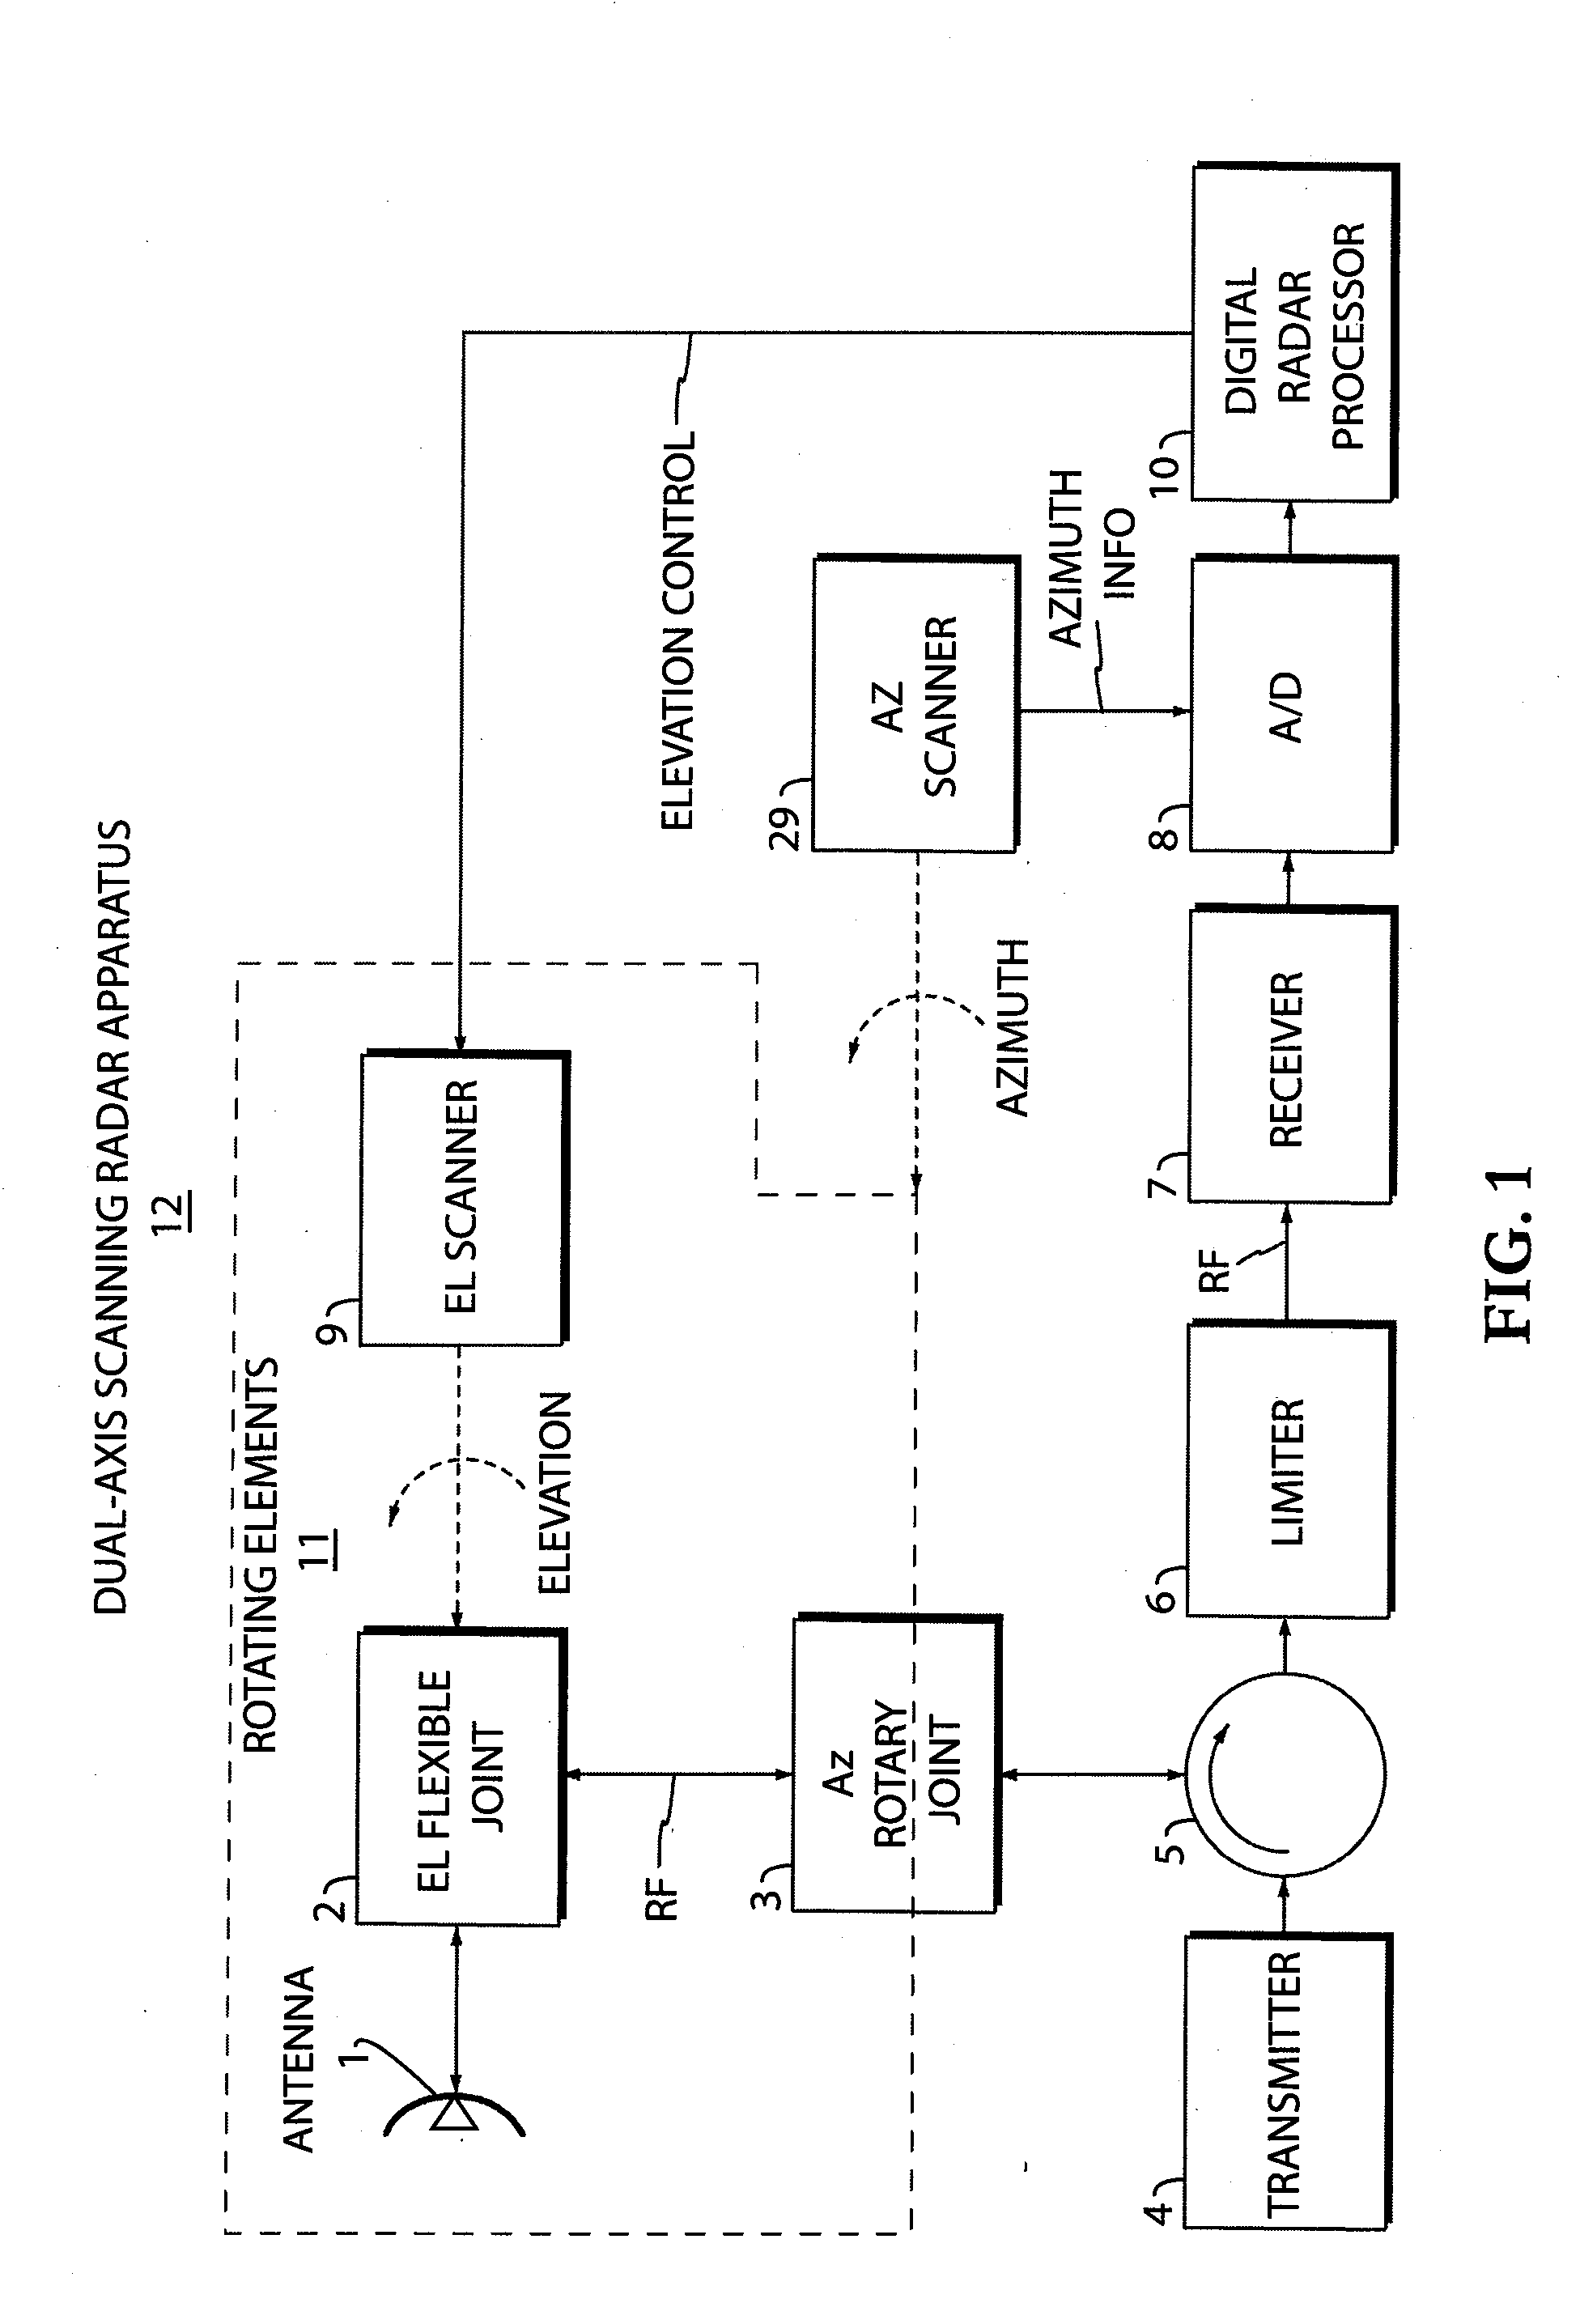 Device and method for 3D sampling with avian radar